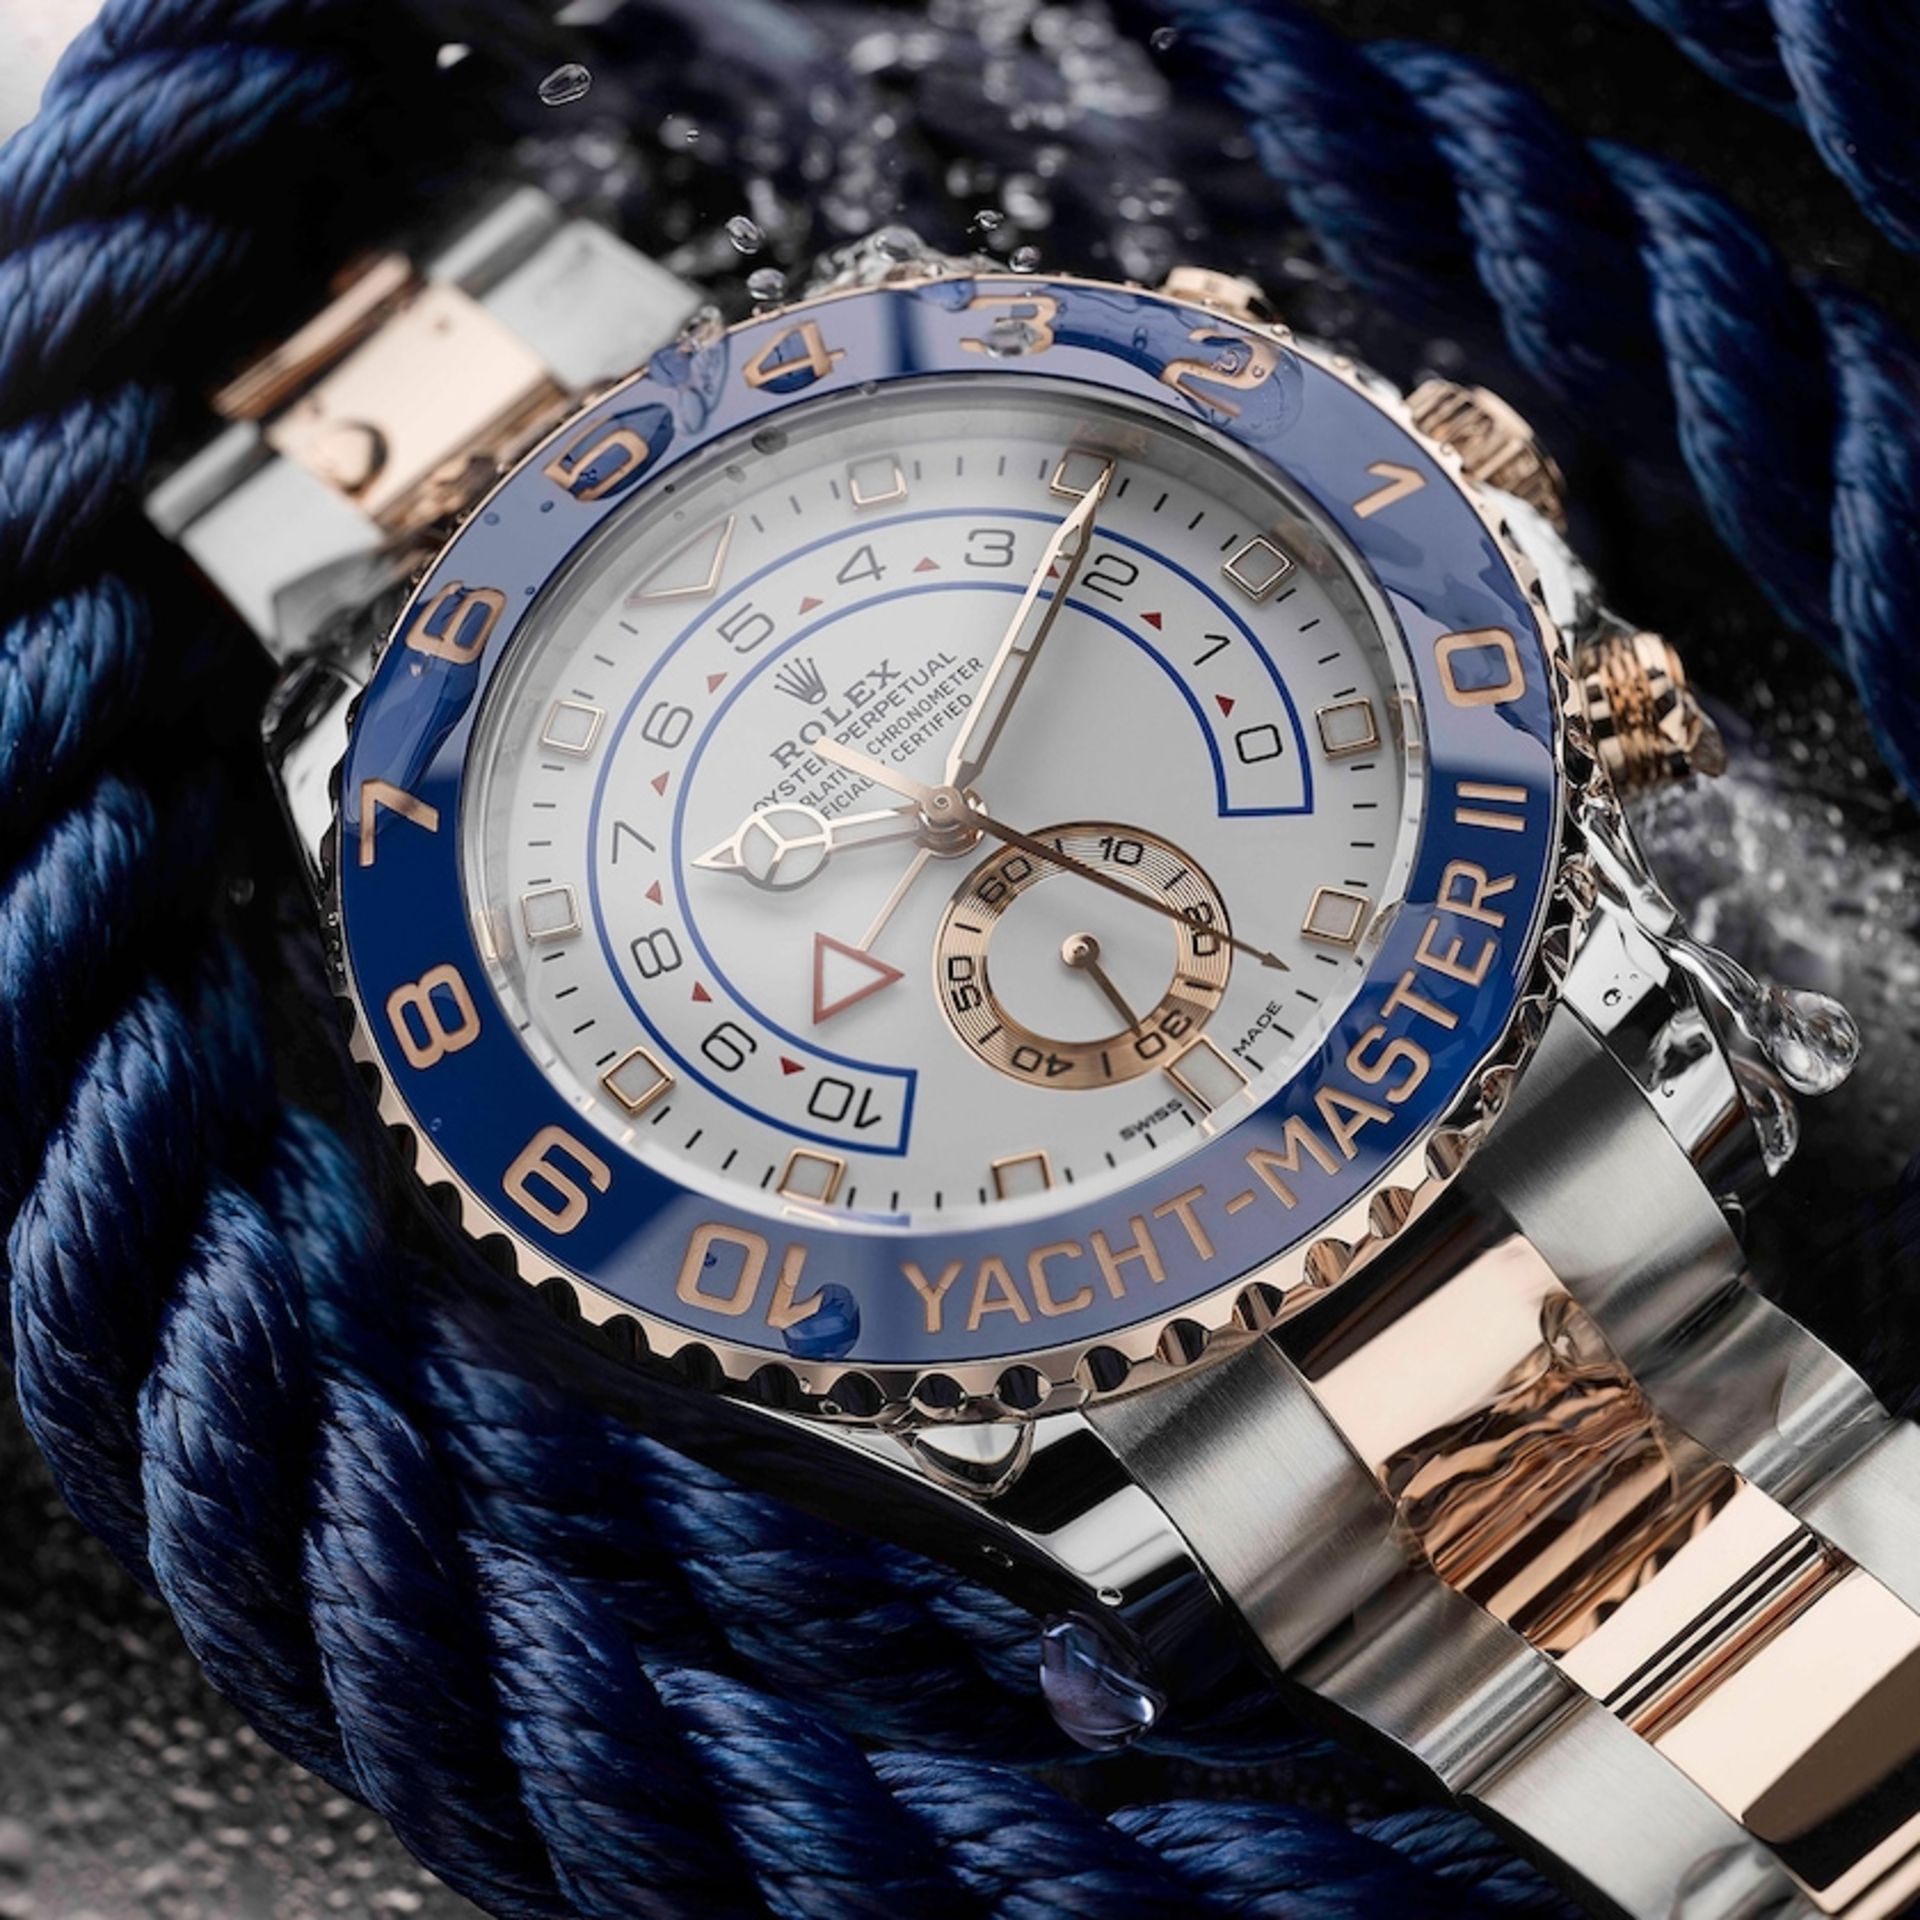 Rolex Yacht-Master II Oyster Perpetual - 2021 OysterSteel And Everrose Gold - Full Set - Image 3 of 4